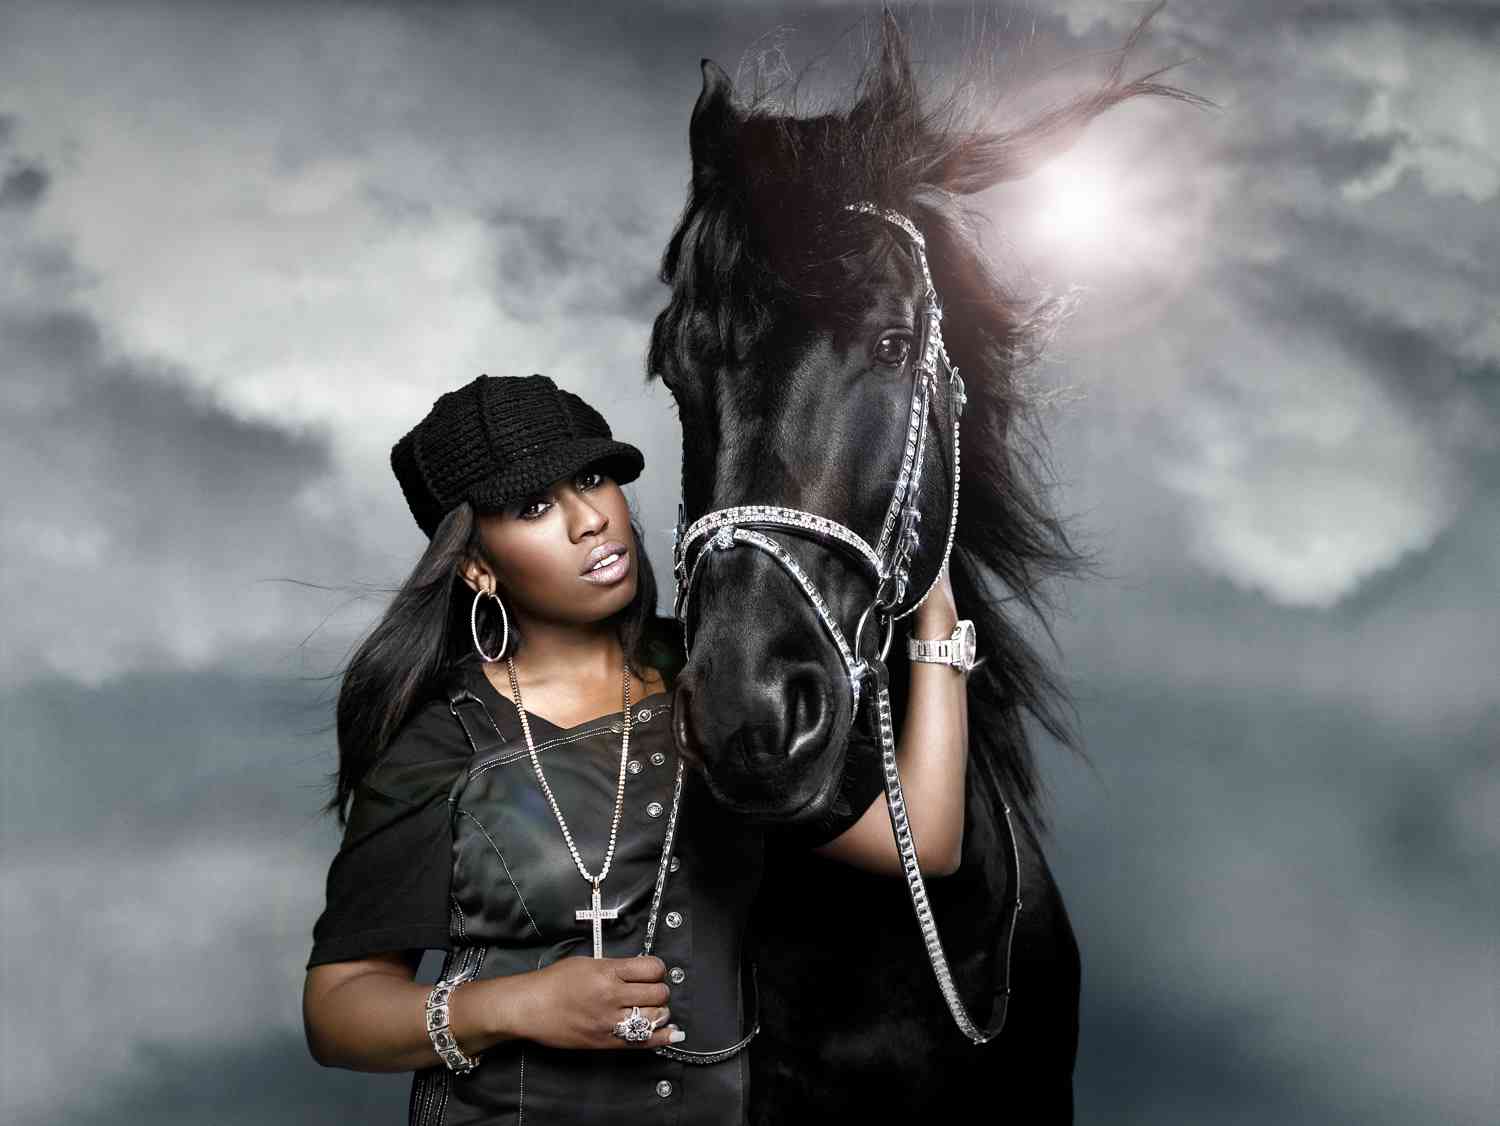 Iconic Image of missy elliott albums/songs cover shot by Warwick Saint